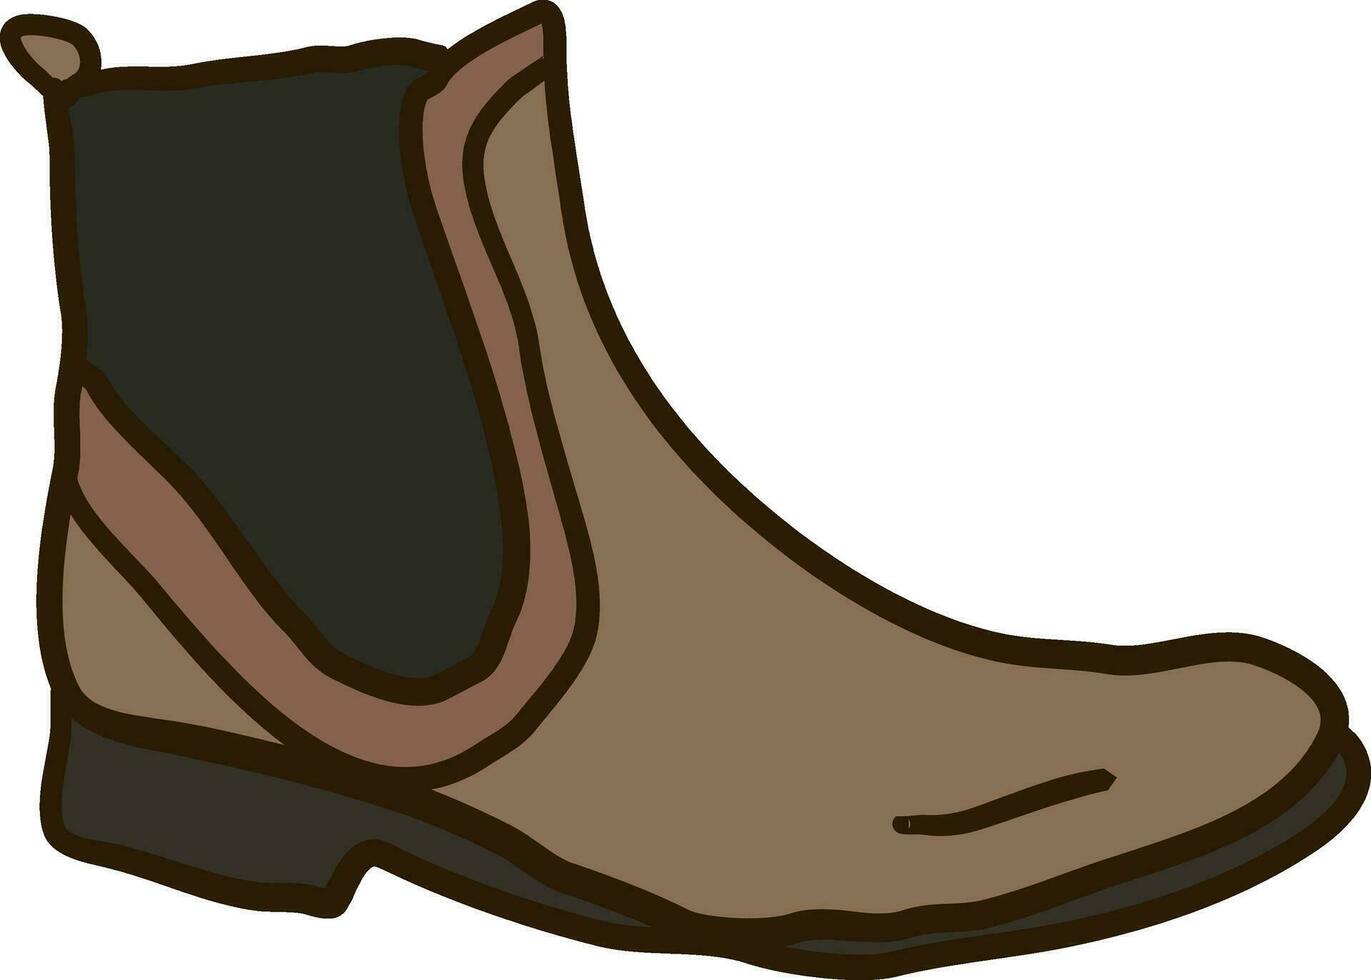 Brown mans boot, illustration, vector on white background.